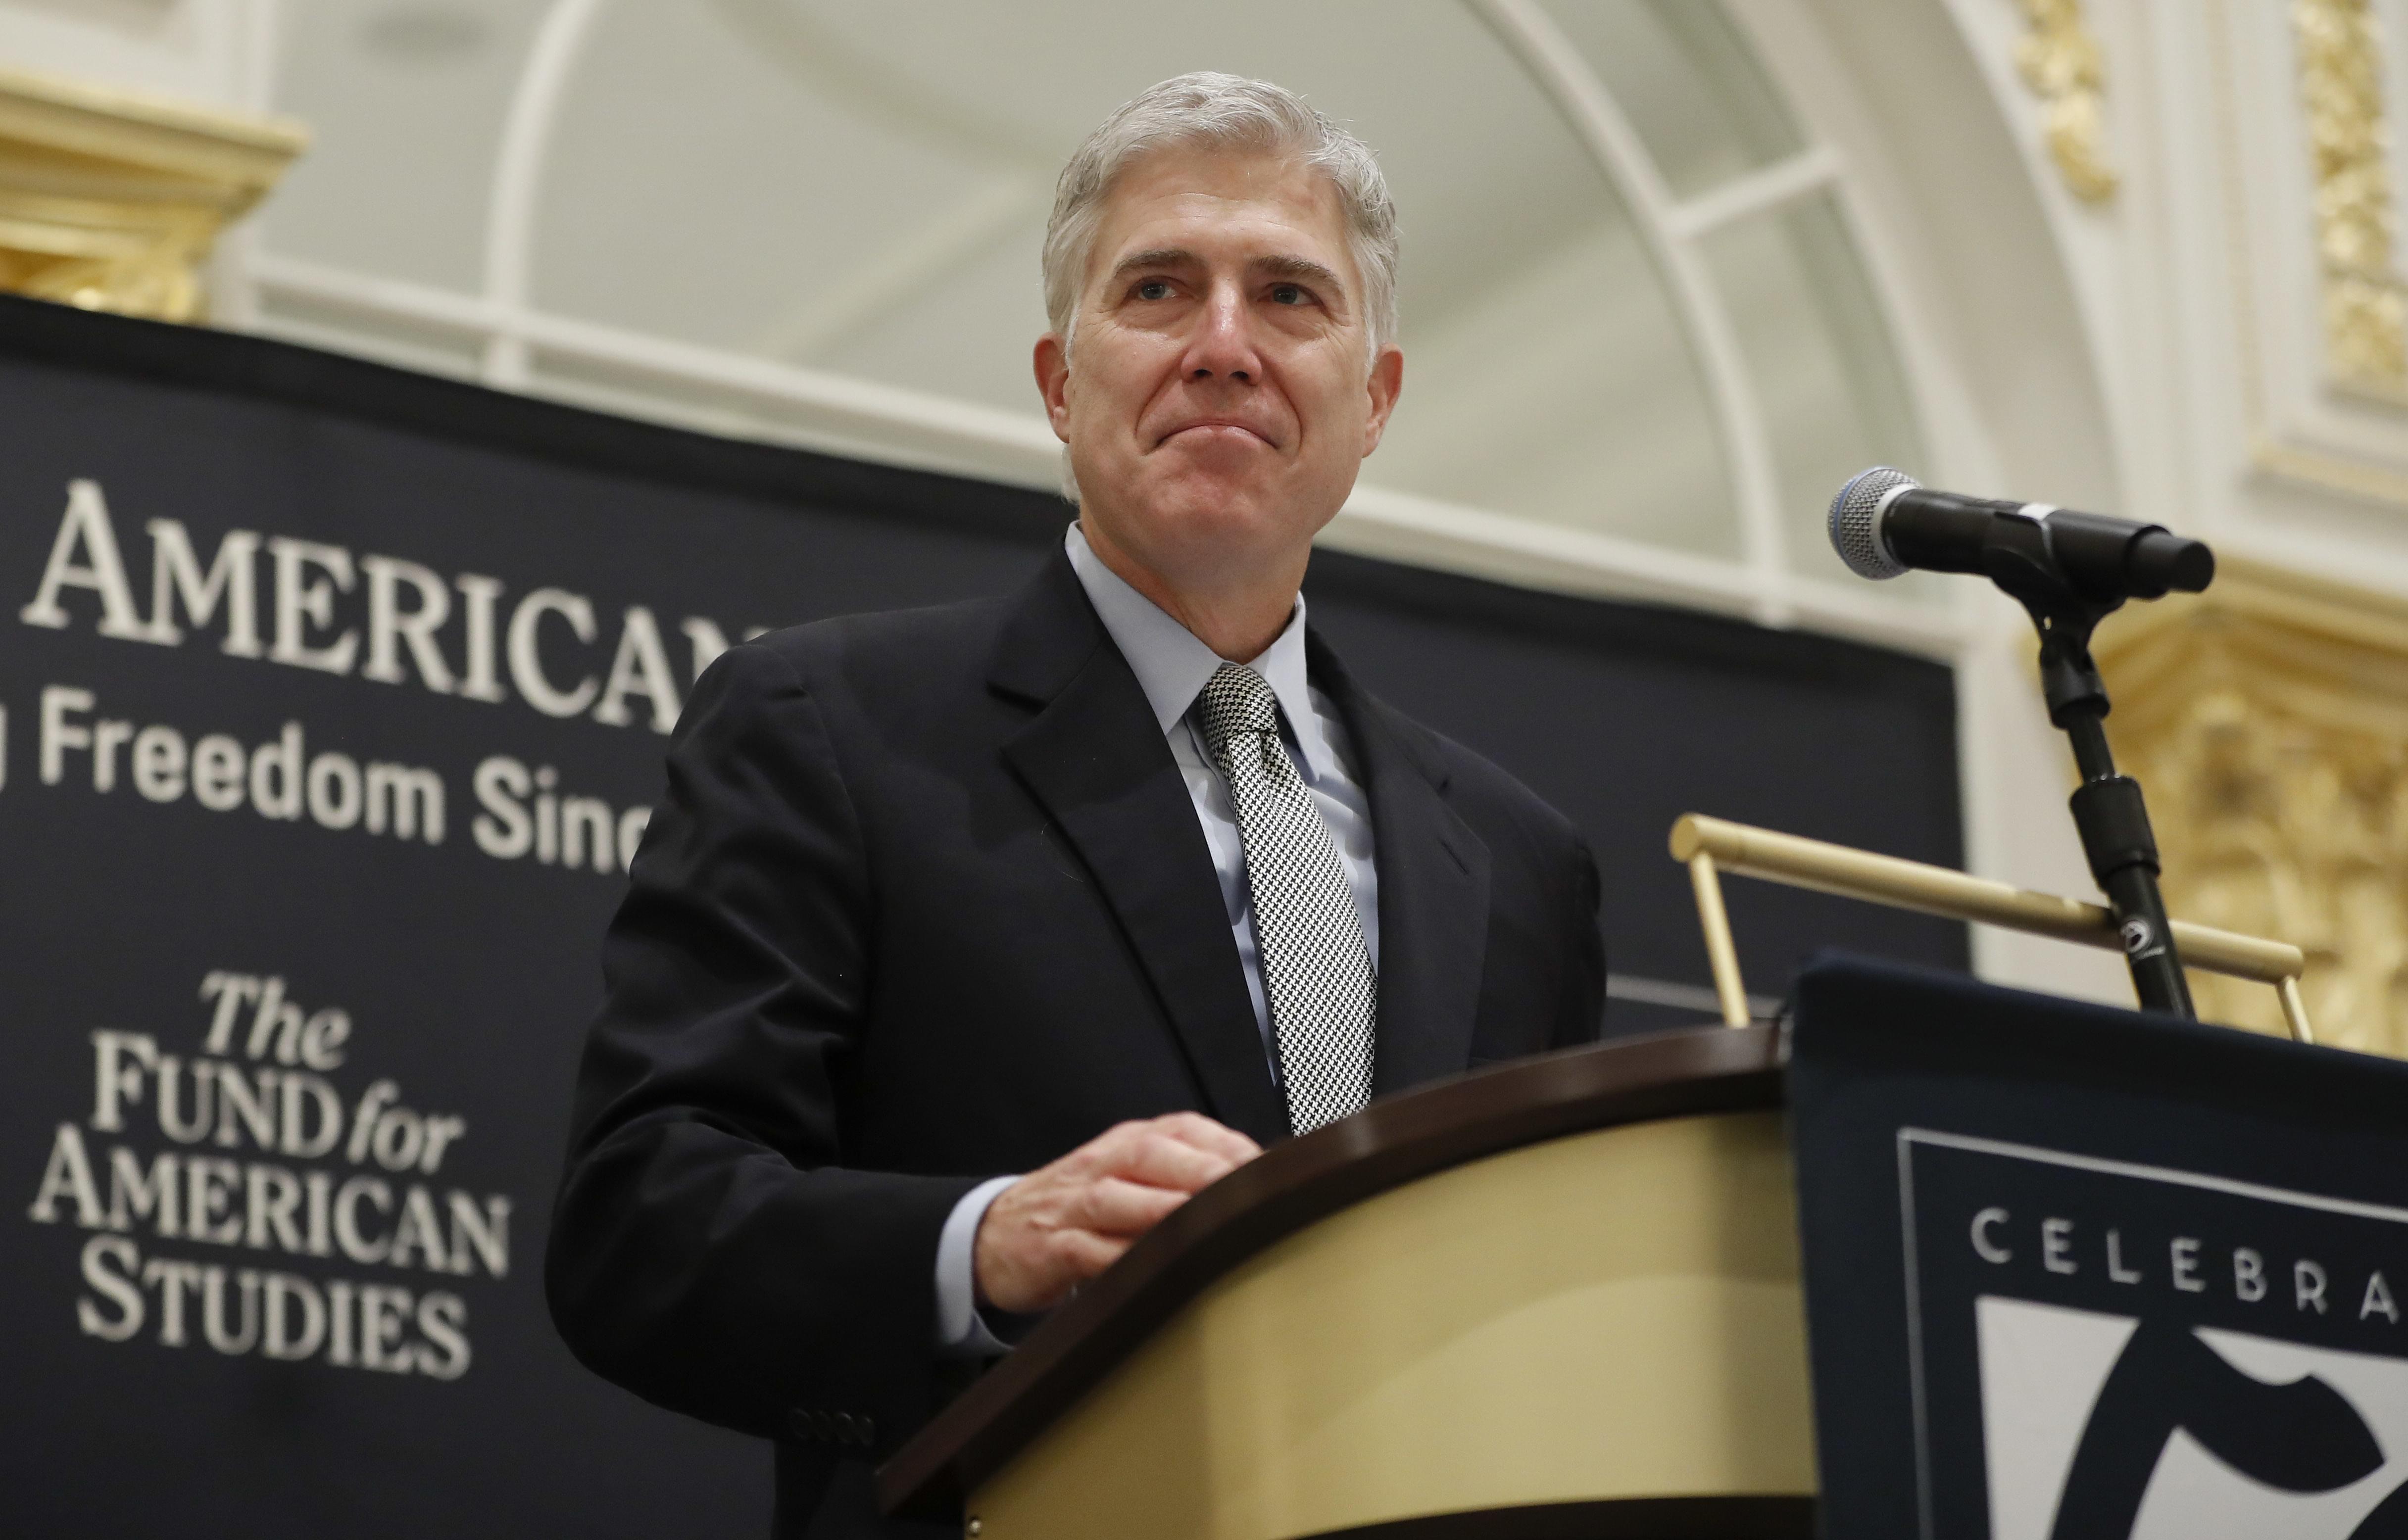 Supreme Court Justice Neil Gorsuch speaks at the 50th anniversary of the Fund for America Studies luncheon at the Trump Hotel in Washington, Thursday, Sept. 28, 2017. 